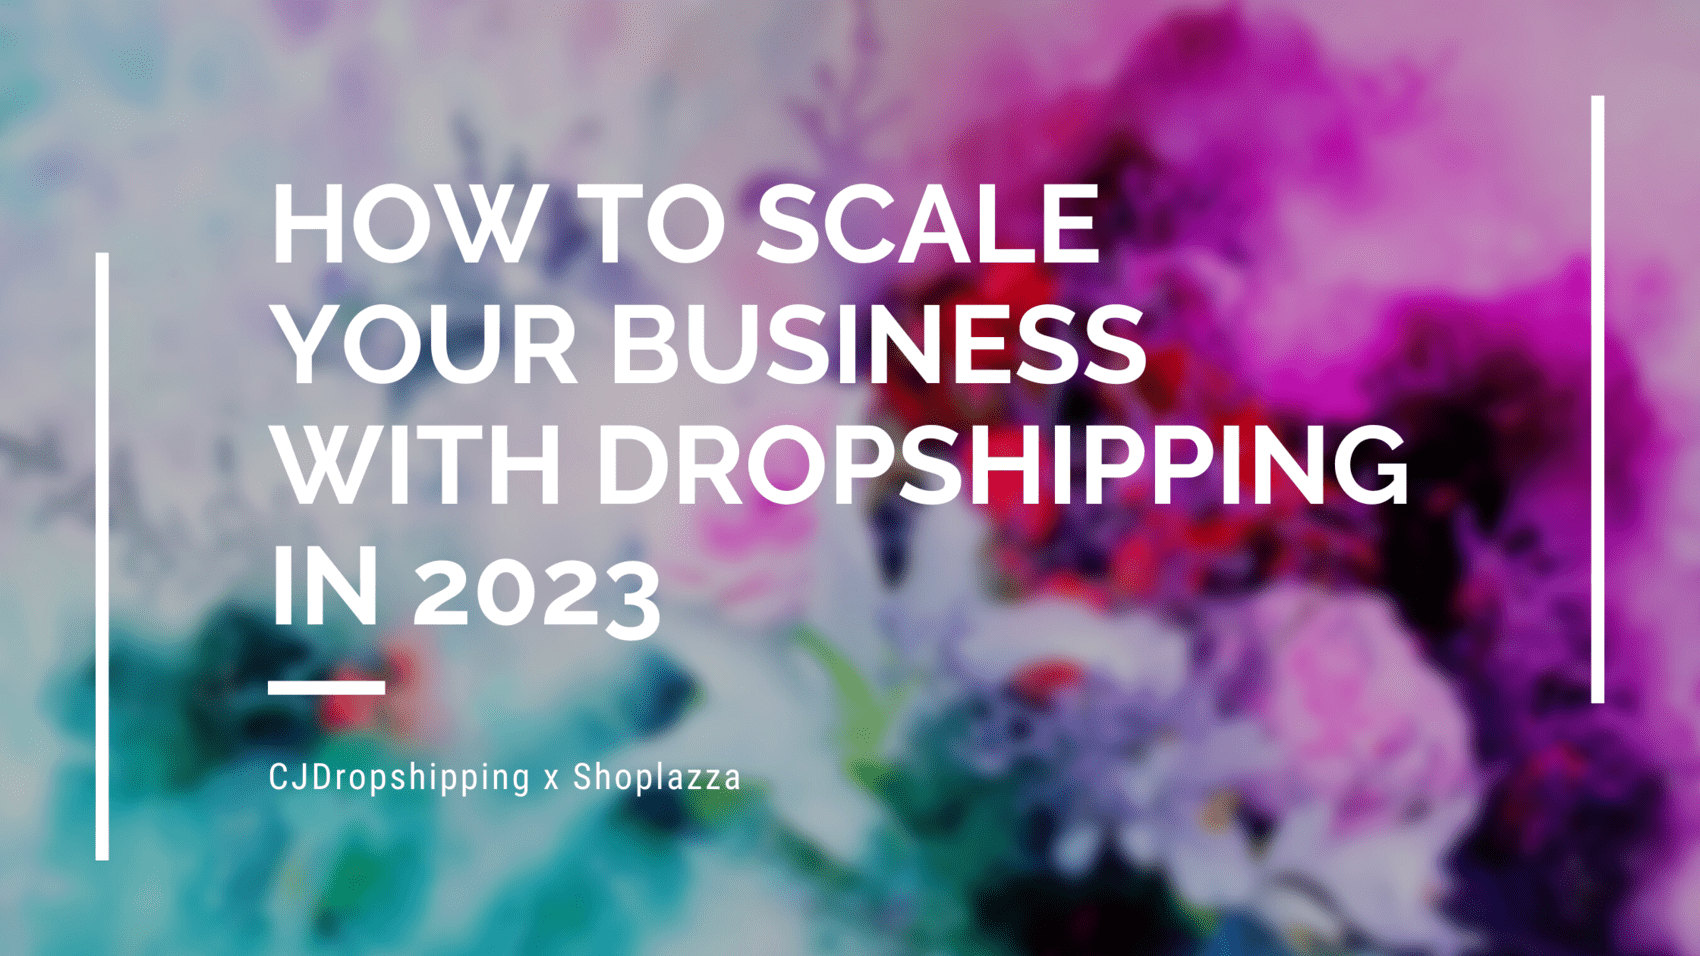 How to Scale your Business with Dropshipping in 2023